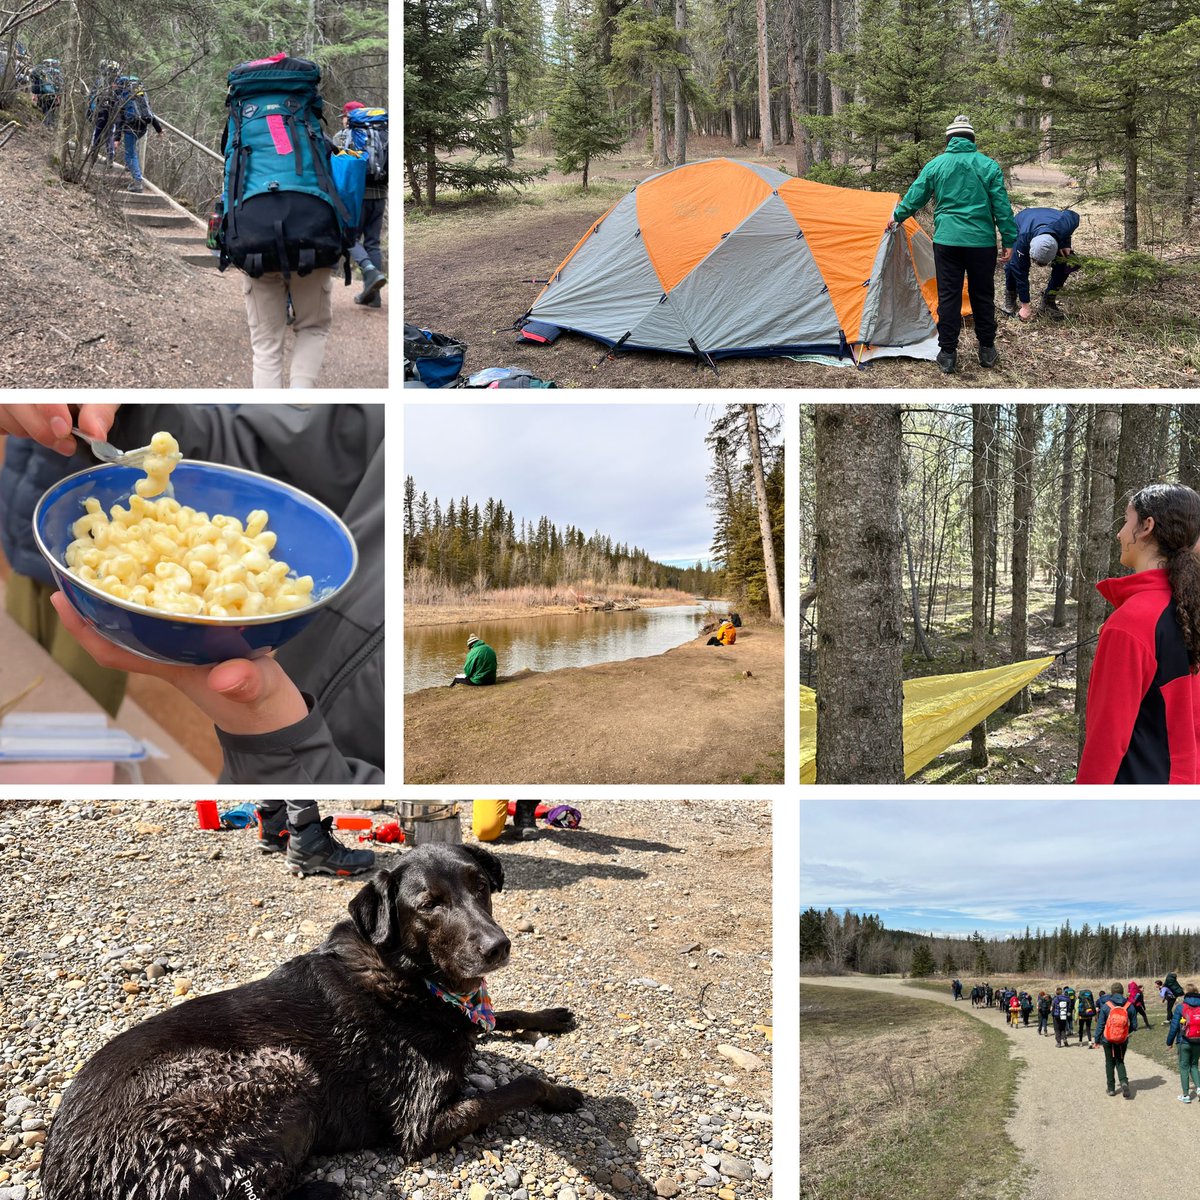 One step closer to our Coast Adventure! The Gr 8 Outdoor Leadership students did an amazing job this weekend at their Simulation Skills Camp! It is amazing what life skills, confidence, and abilities grow within students in an Outdoor Education setting.